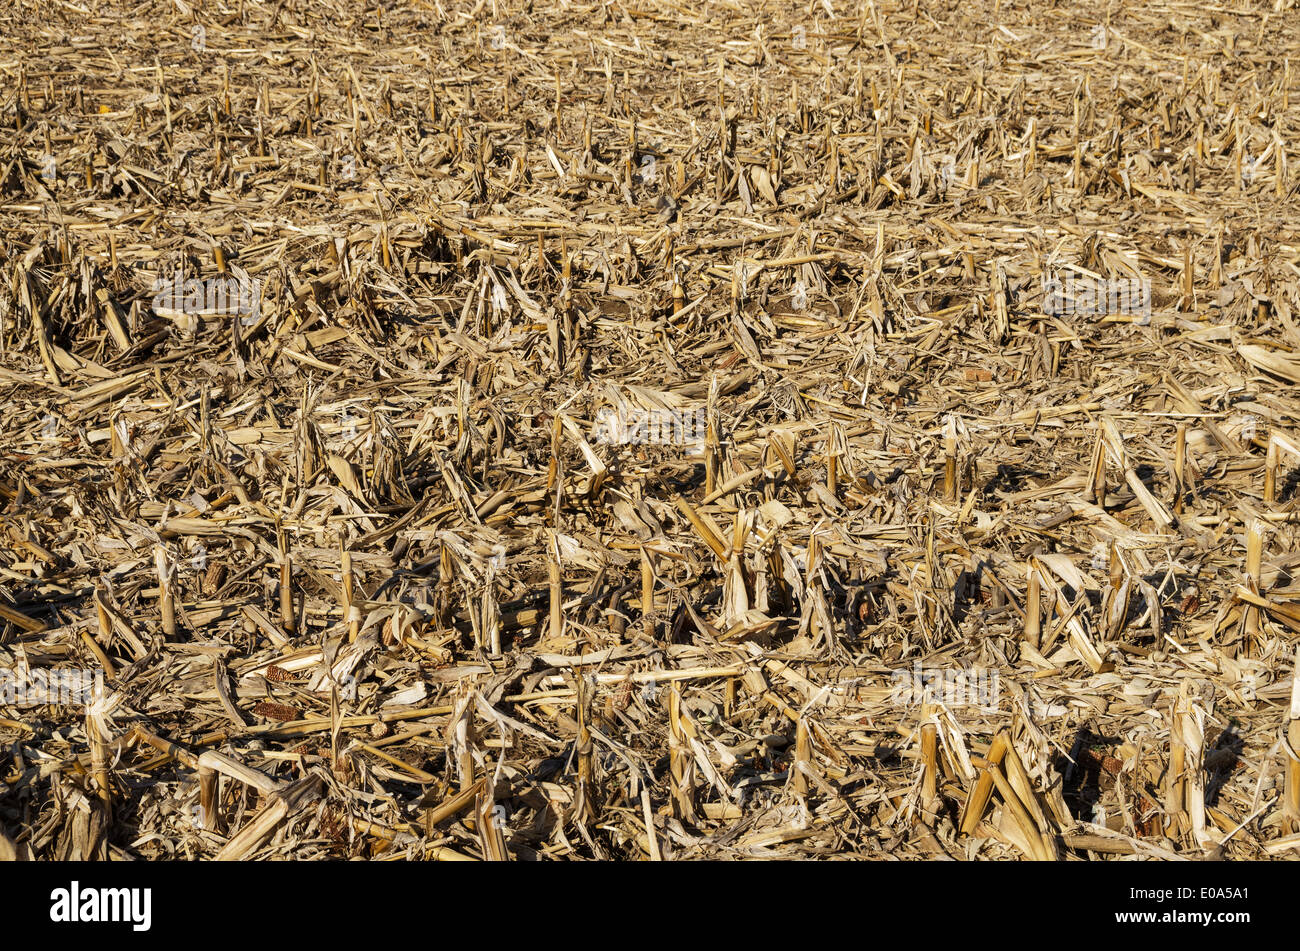 corn field after harvest with stover the broken stalks leaves and cobs Stock Photo